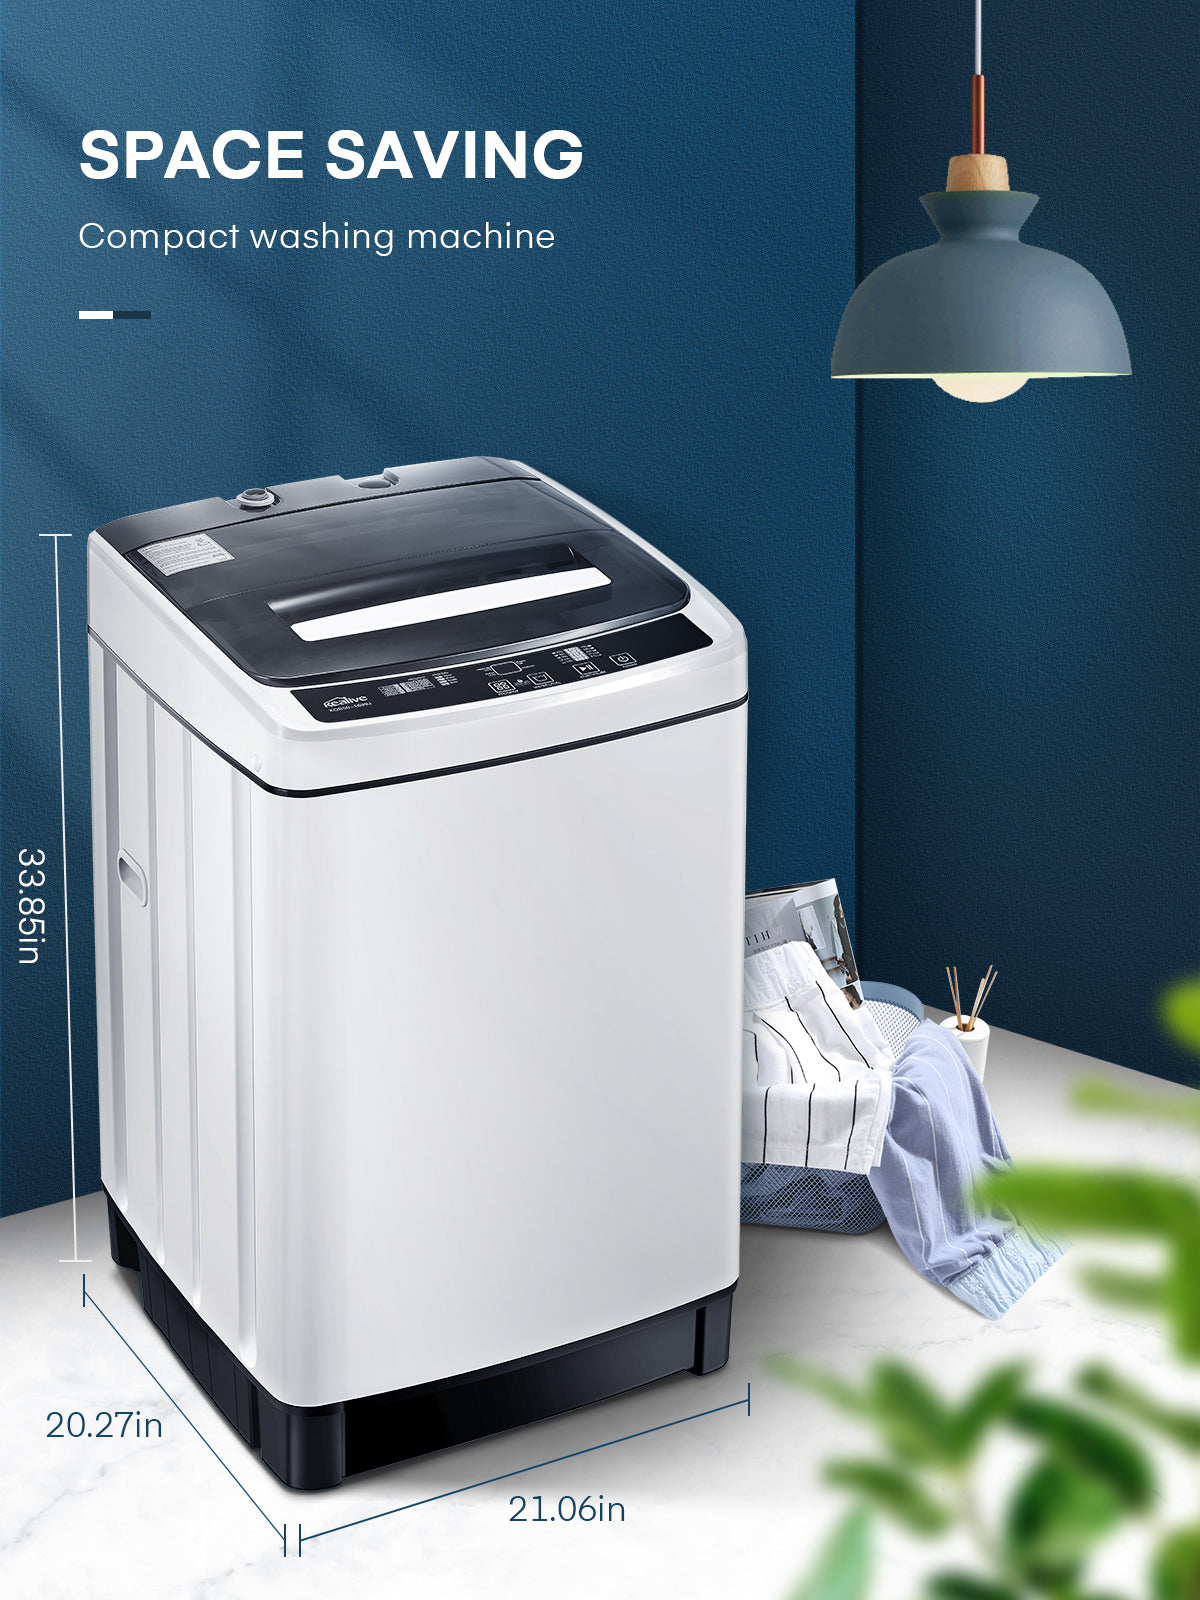 FOHERE Full Automatic Washing Machine, 1.5 Cubic feet 11 lbs Capacity  Portable Machine, 8 Programs 10 Water Levels Energy Saving Top Load Washer  for Apartment Dorm 